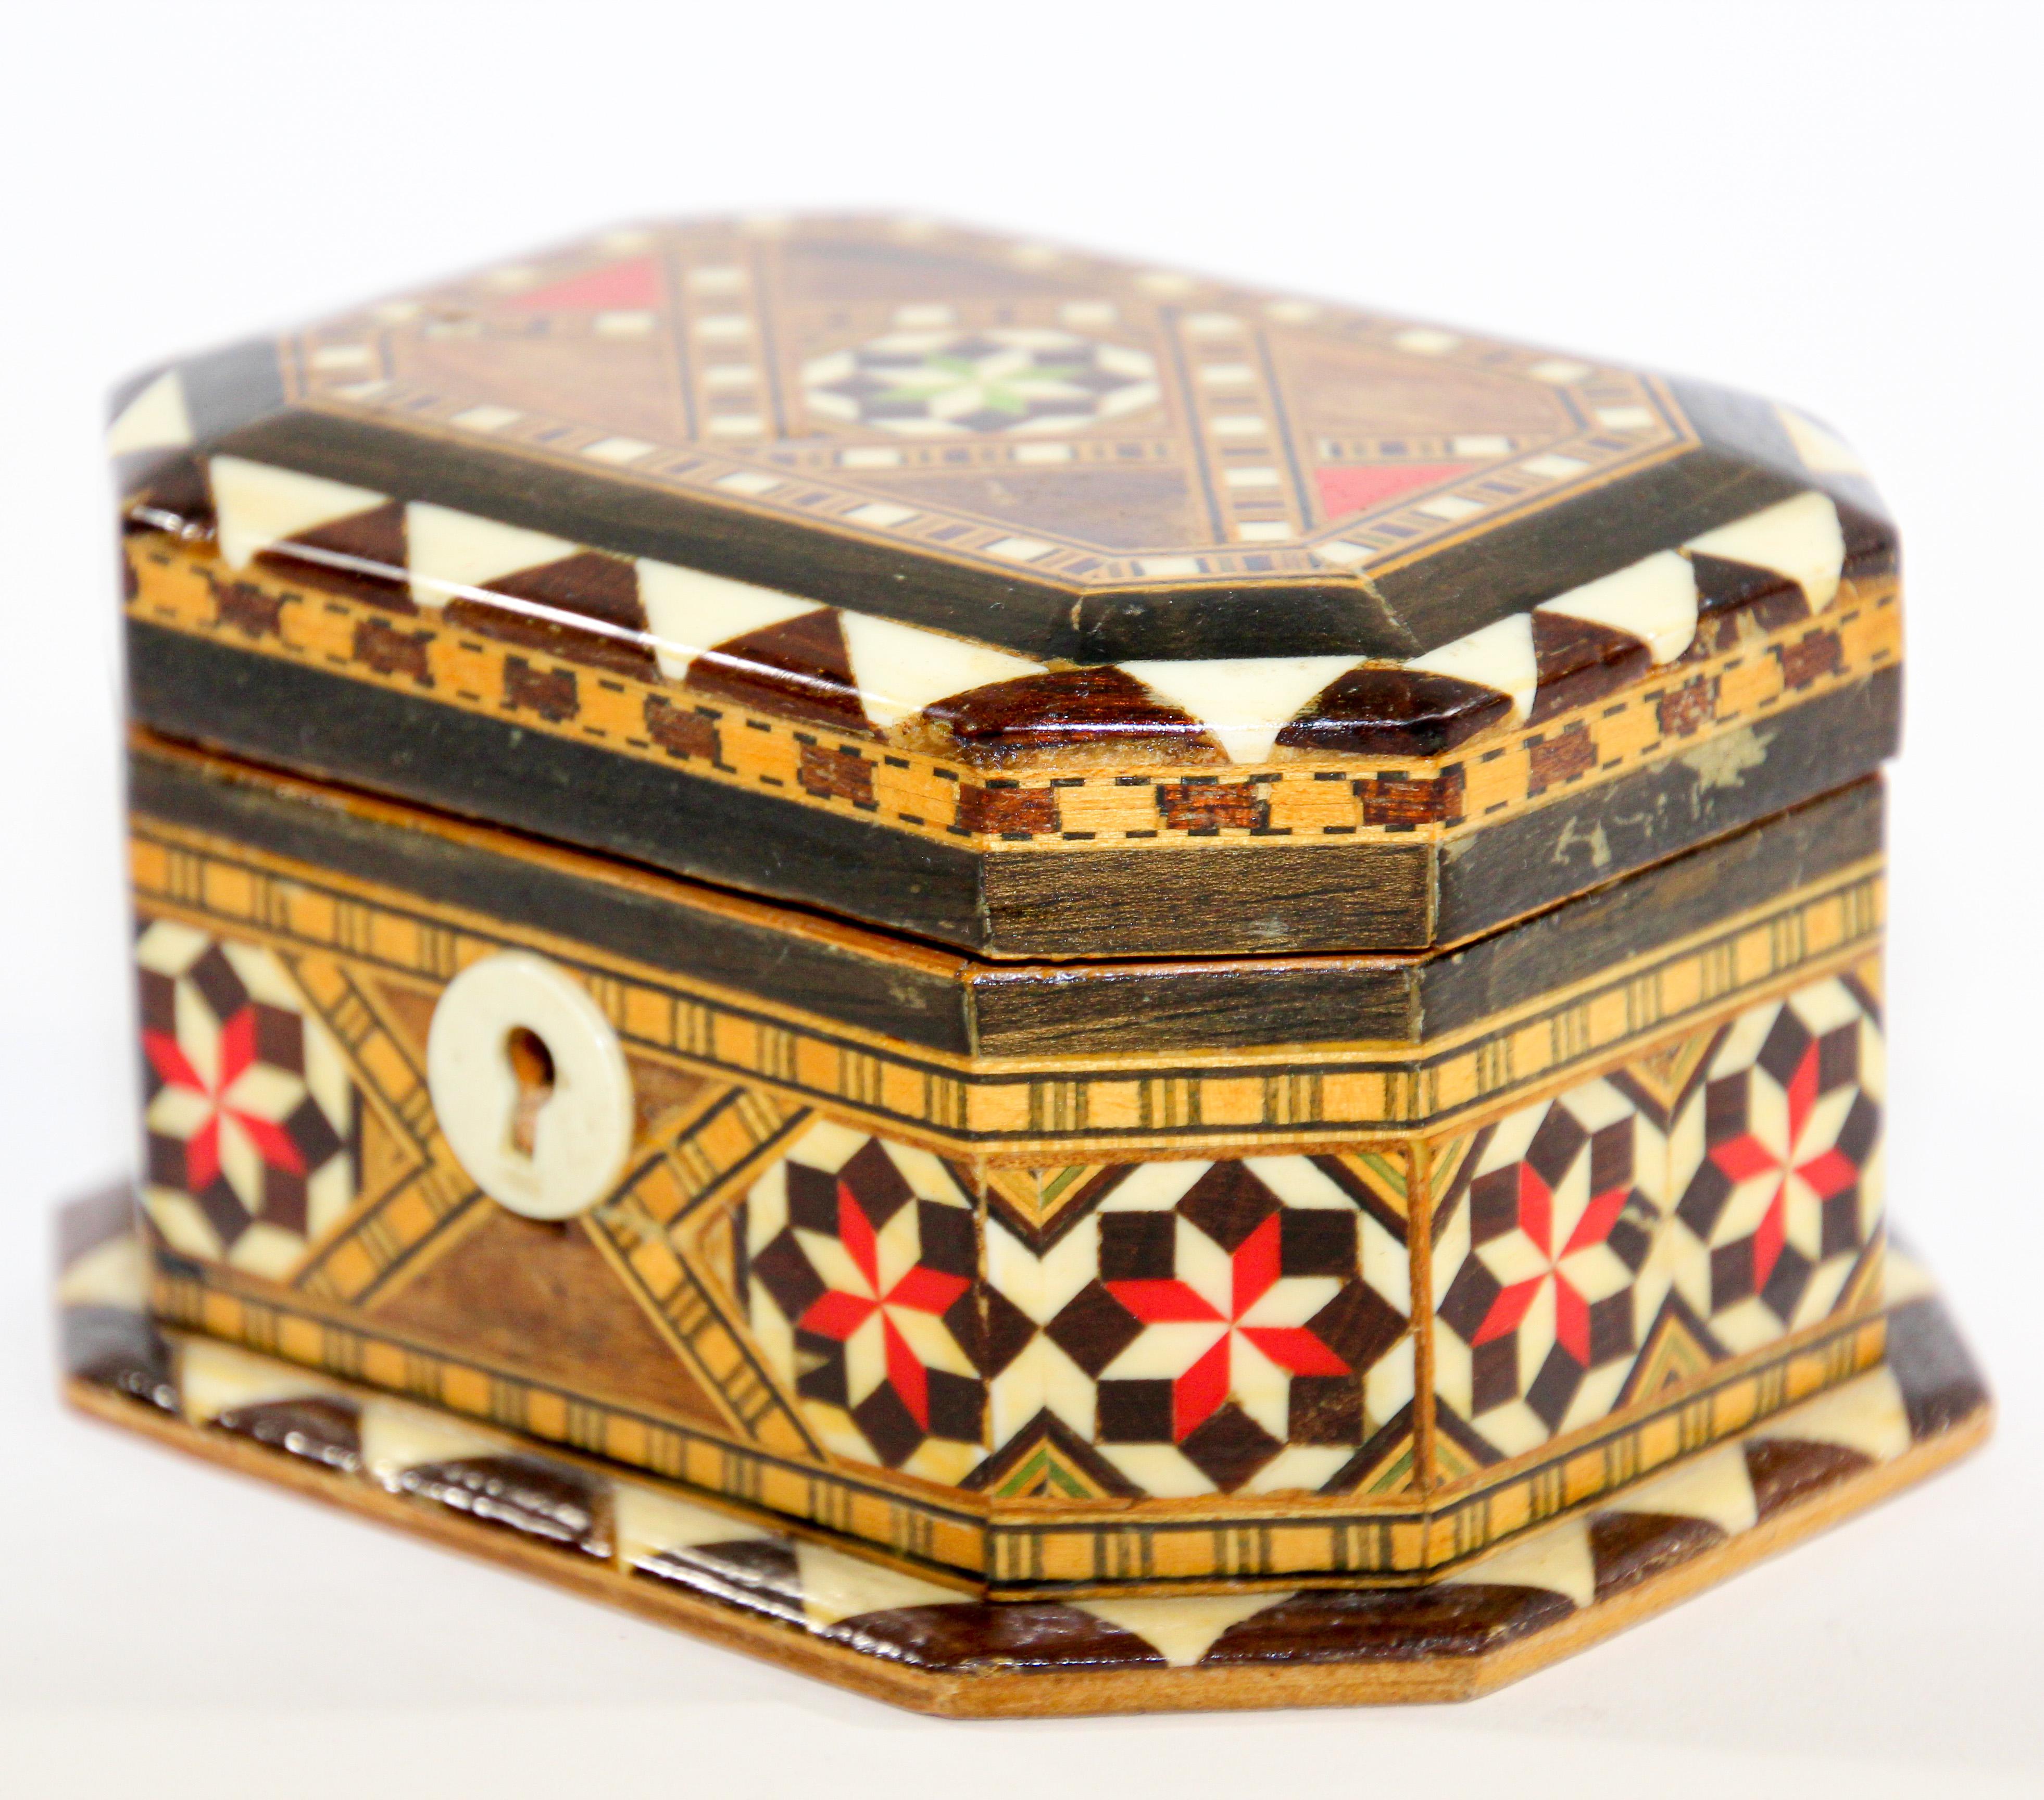 Spanish inlaid Marquetry trinket Moorish box.
Exquisite handcrafted Middle Eastern mosaic marquetry inlaid walnut wood box.
Handcrafted in Spain in the Moorish Syrian style with red velvet lined and a mirror.
Decorative box intricately and finely